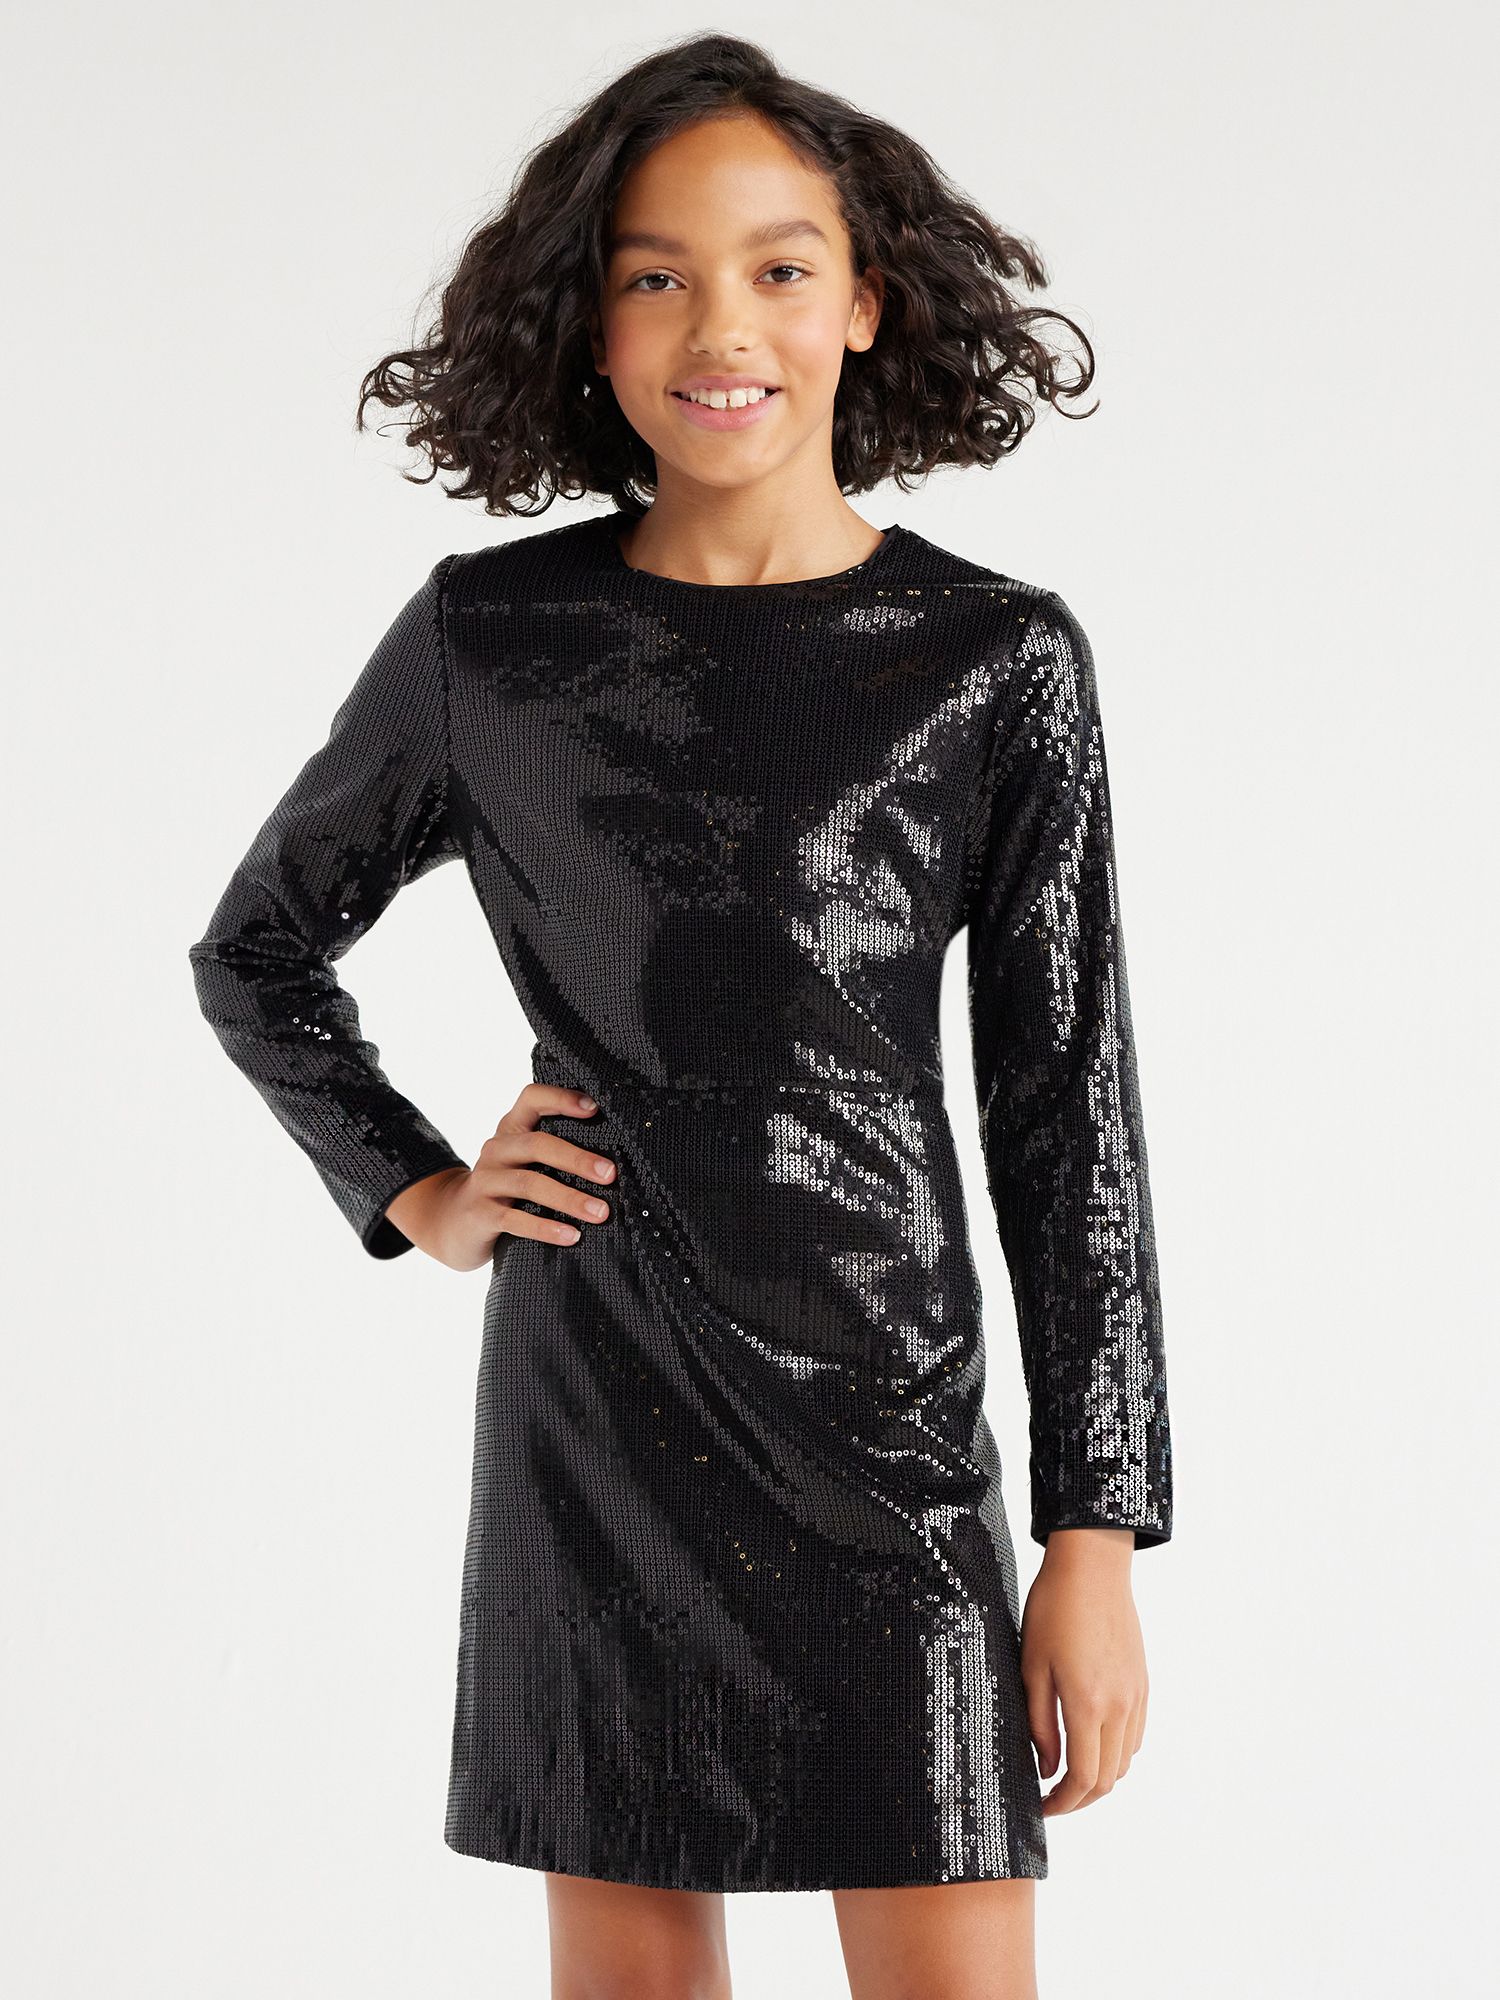 Scoop Girls Sequin Dress with Long Sleeves, Sizes 4-18 | Walmart (US)